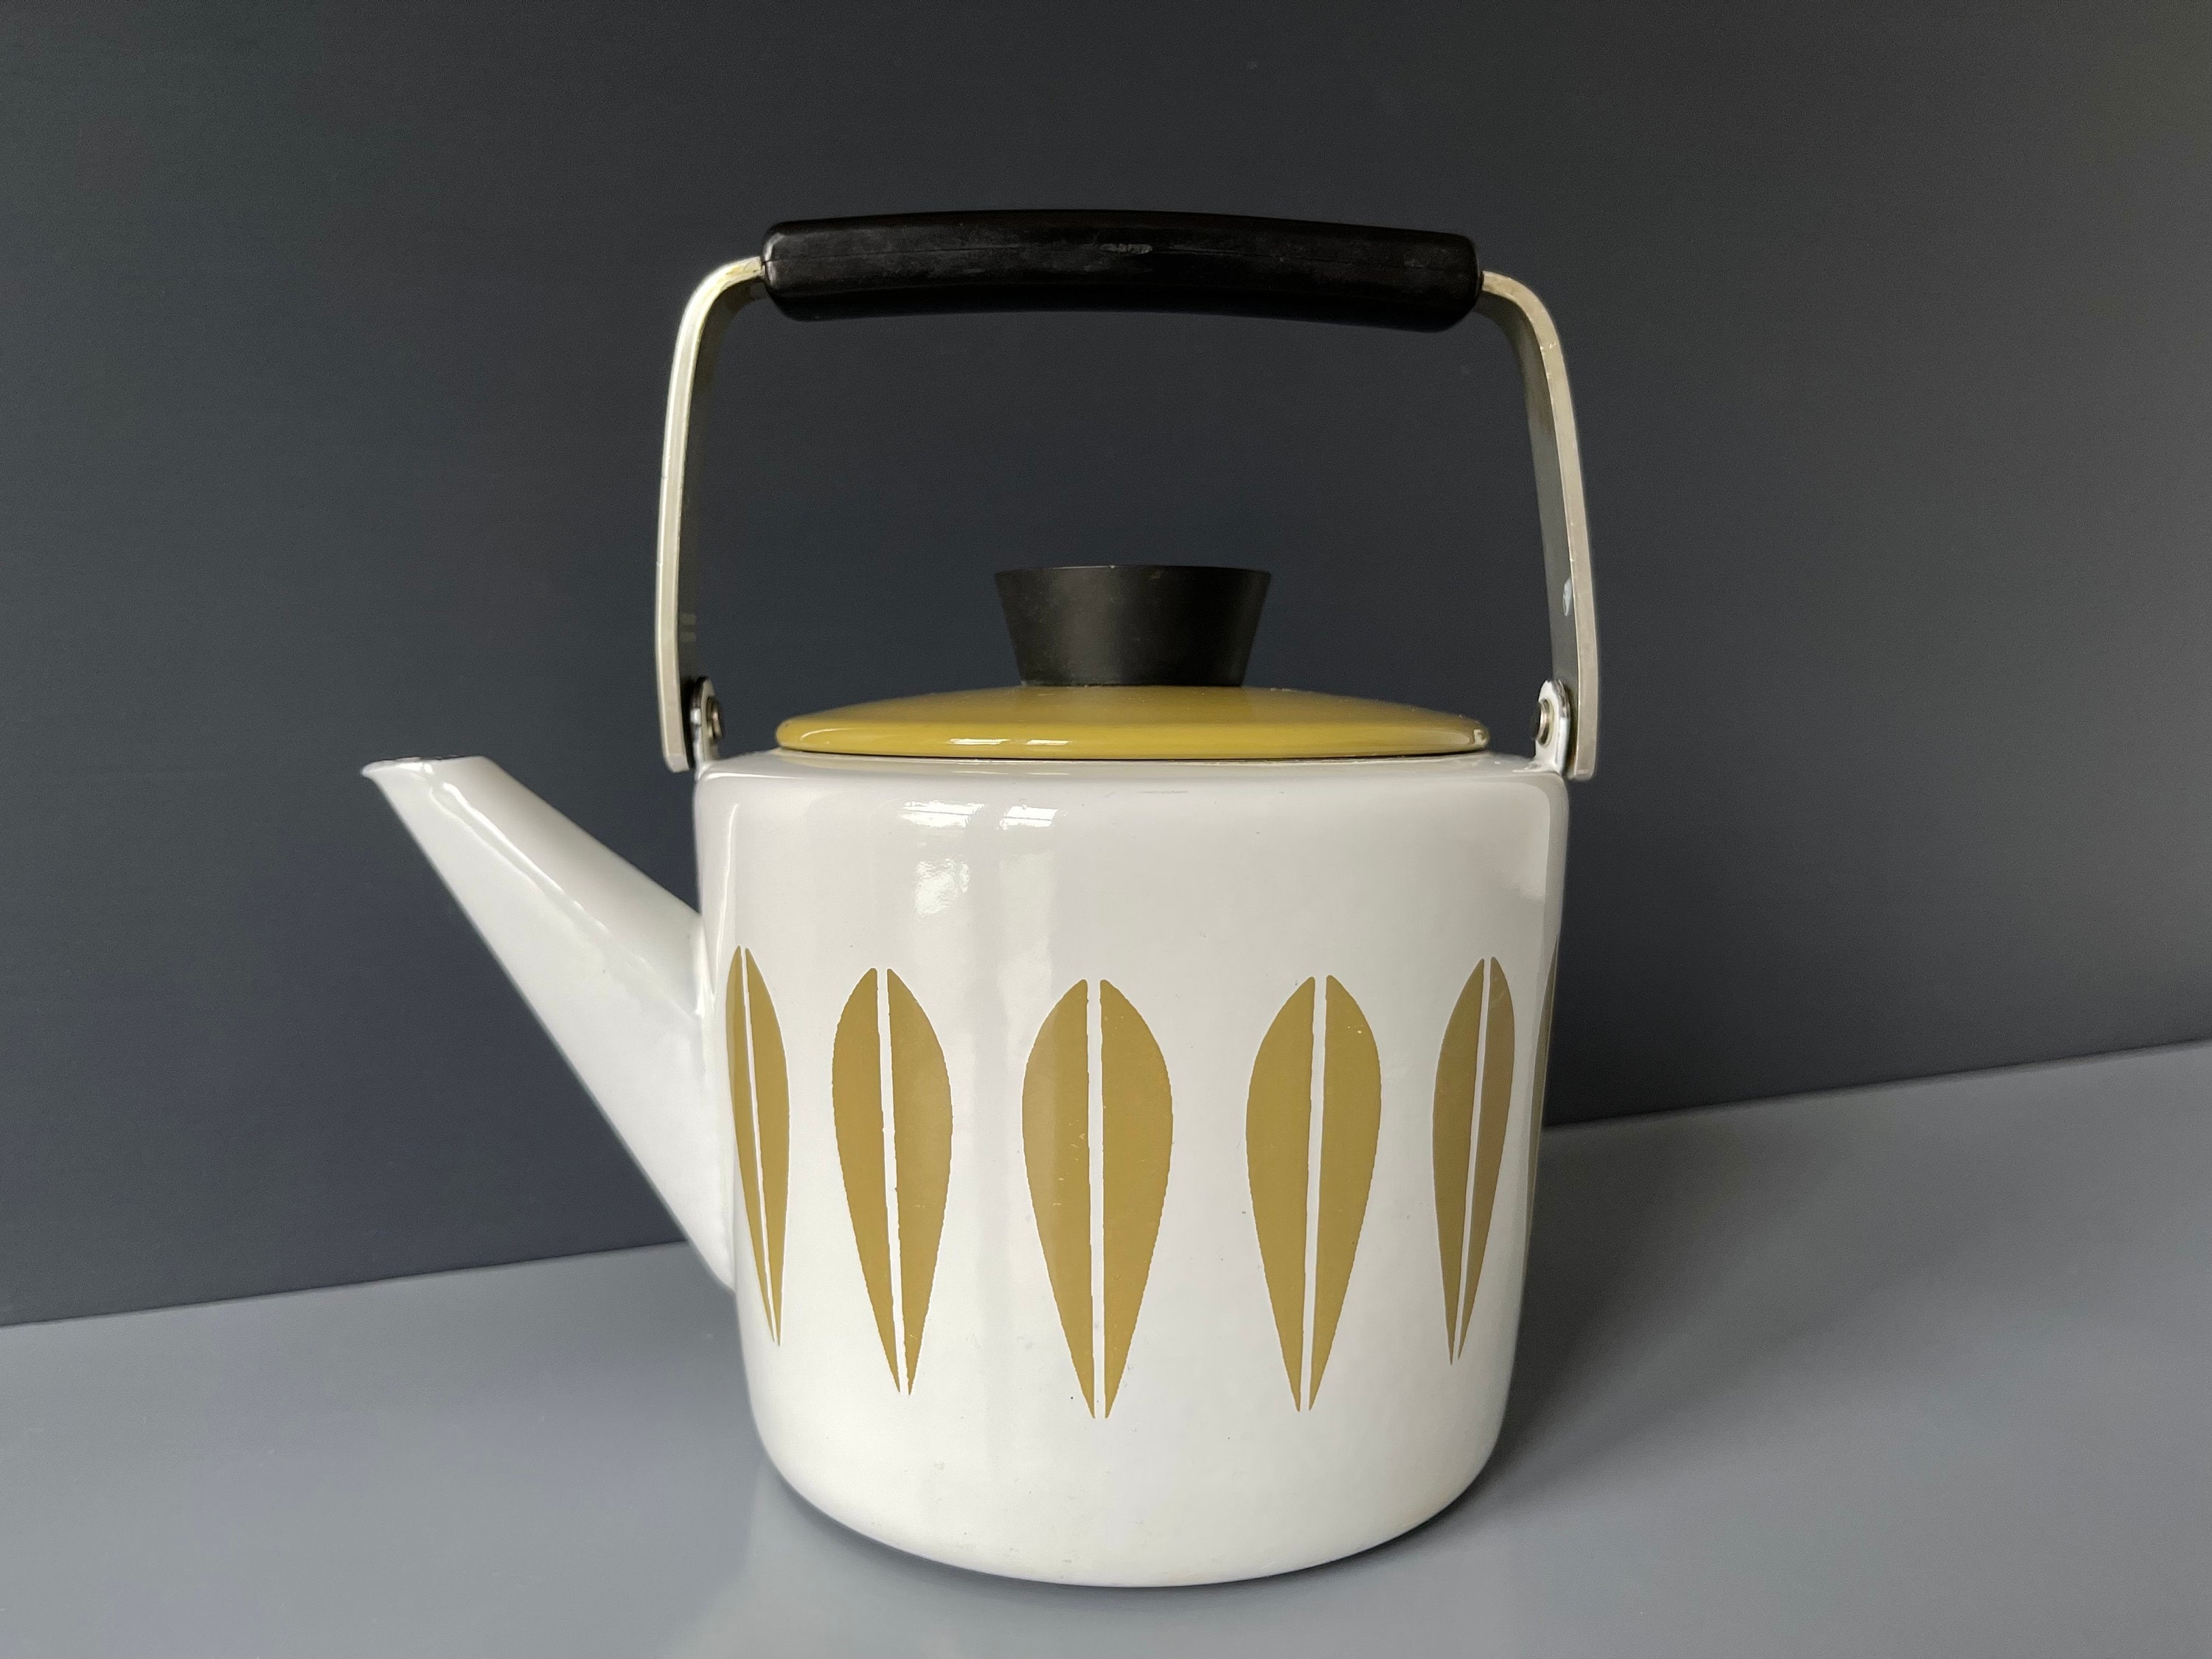 Electric Teapots & Electric Kettles With Inducttion Cooker – Umi Tea Sets